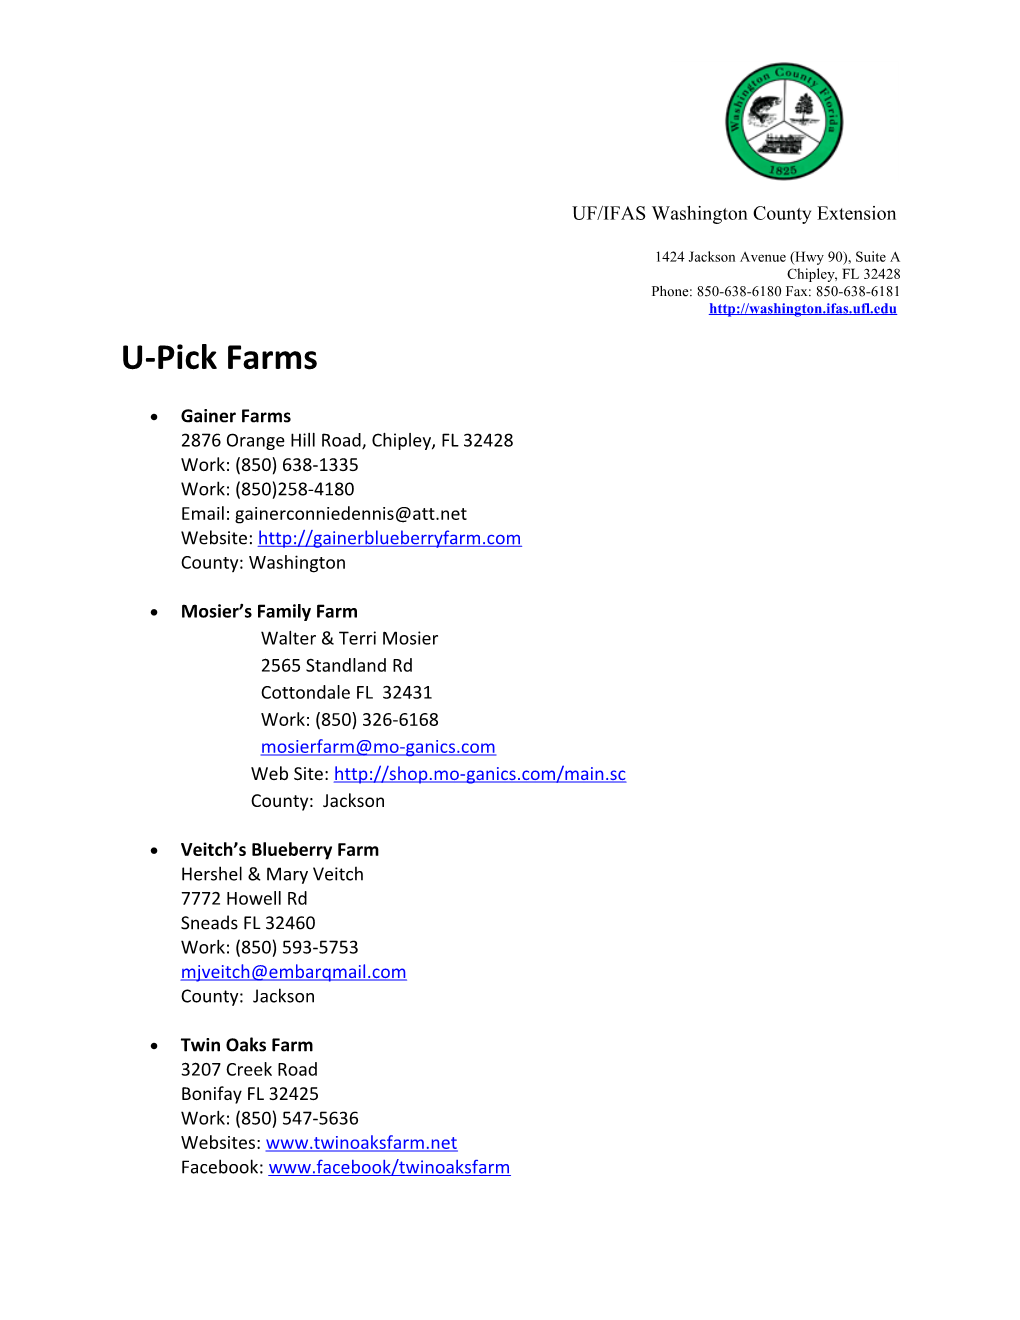 UF/IFAS Washington County Extension